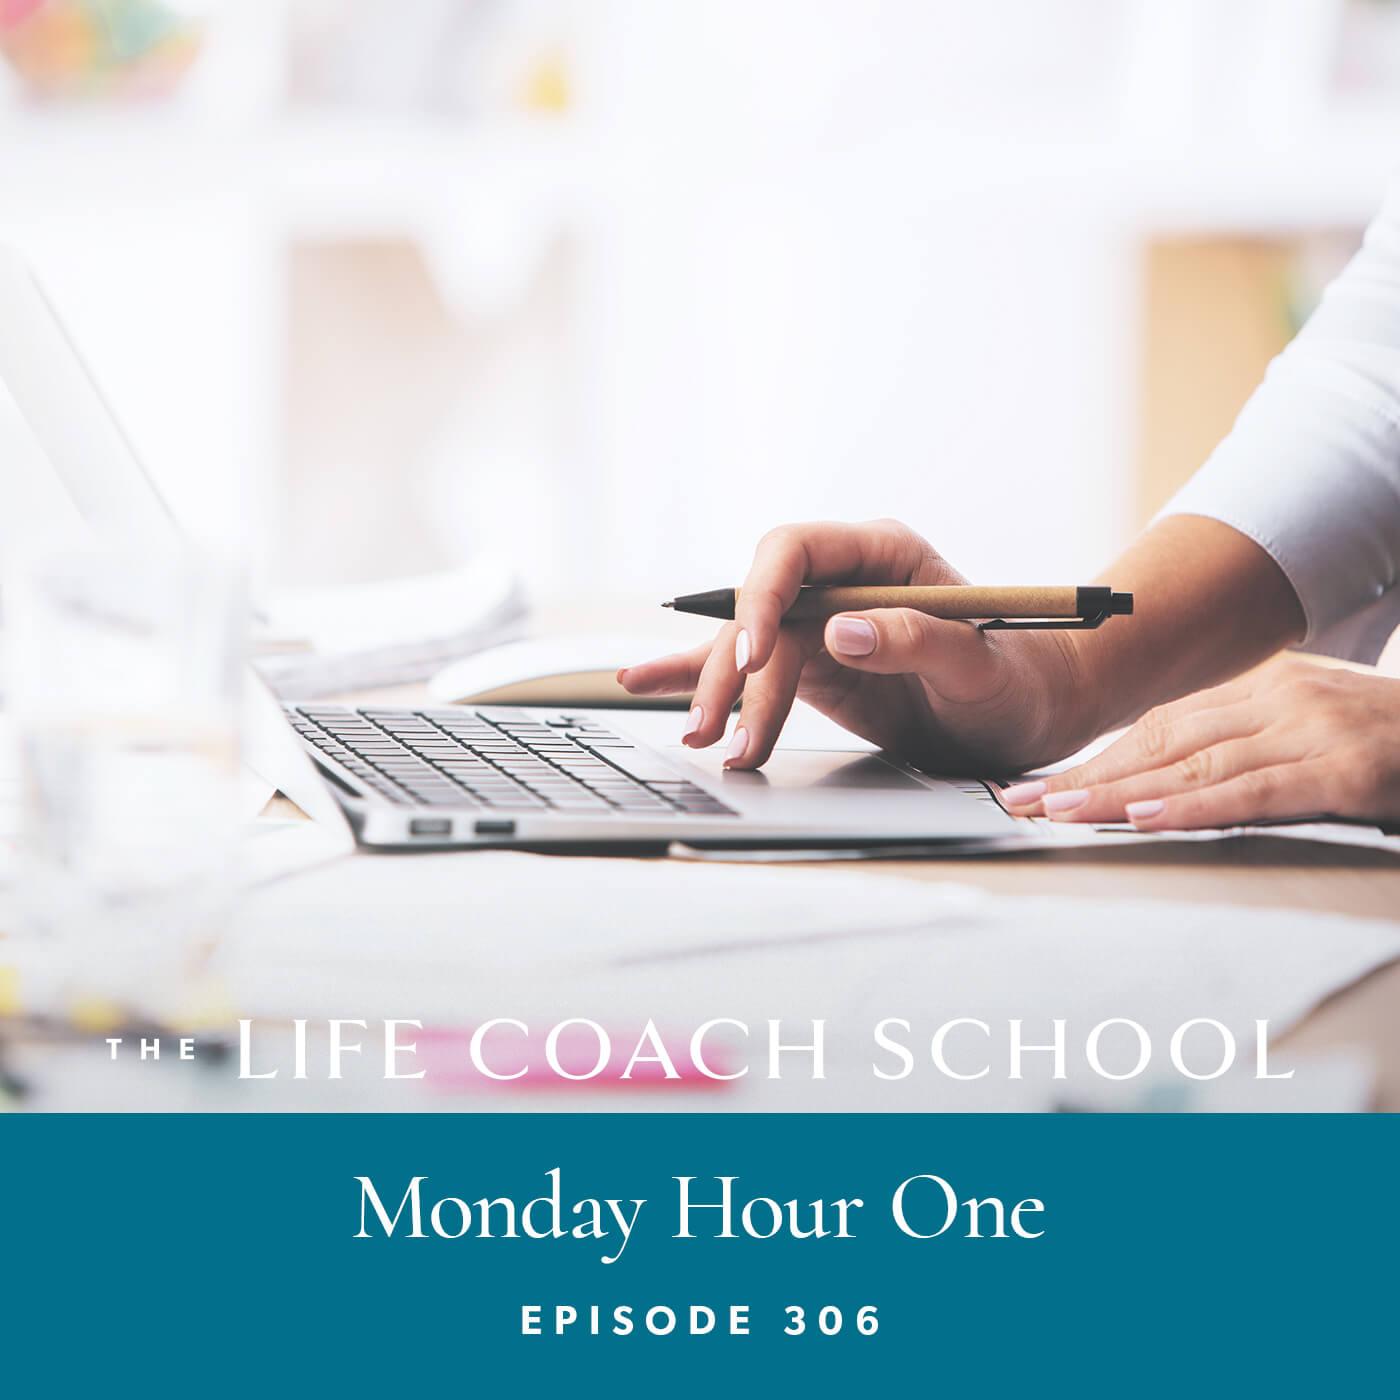 The Life Coach School Podcast with Brooke Castillo | Episode 306 | Monday Hour One